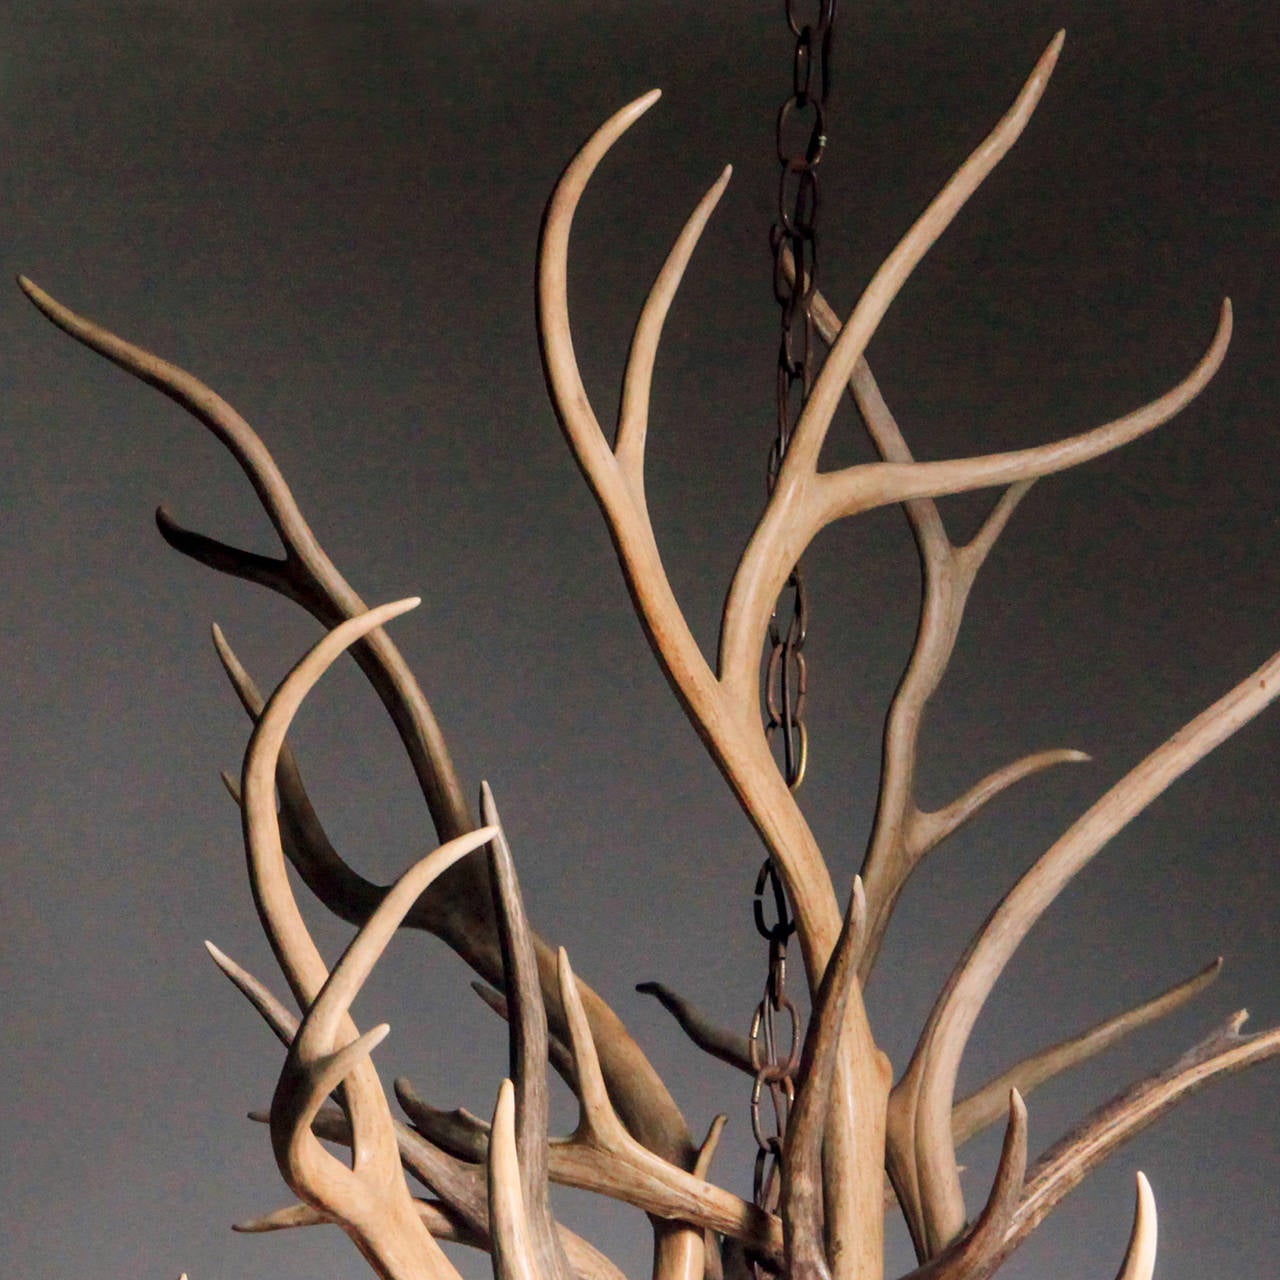 Large American deer antler chandelier in light buff tones made with deer and caribou antler that are naturally shed. Electrified six-light chandelier. Limited edition chandelier made by American craftsmen.